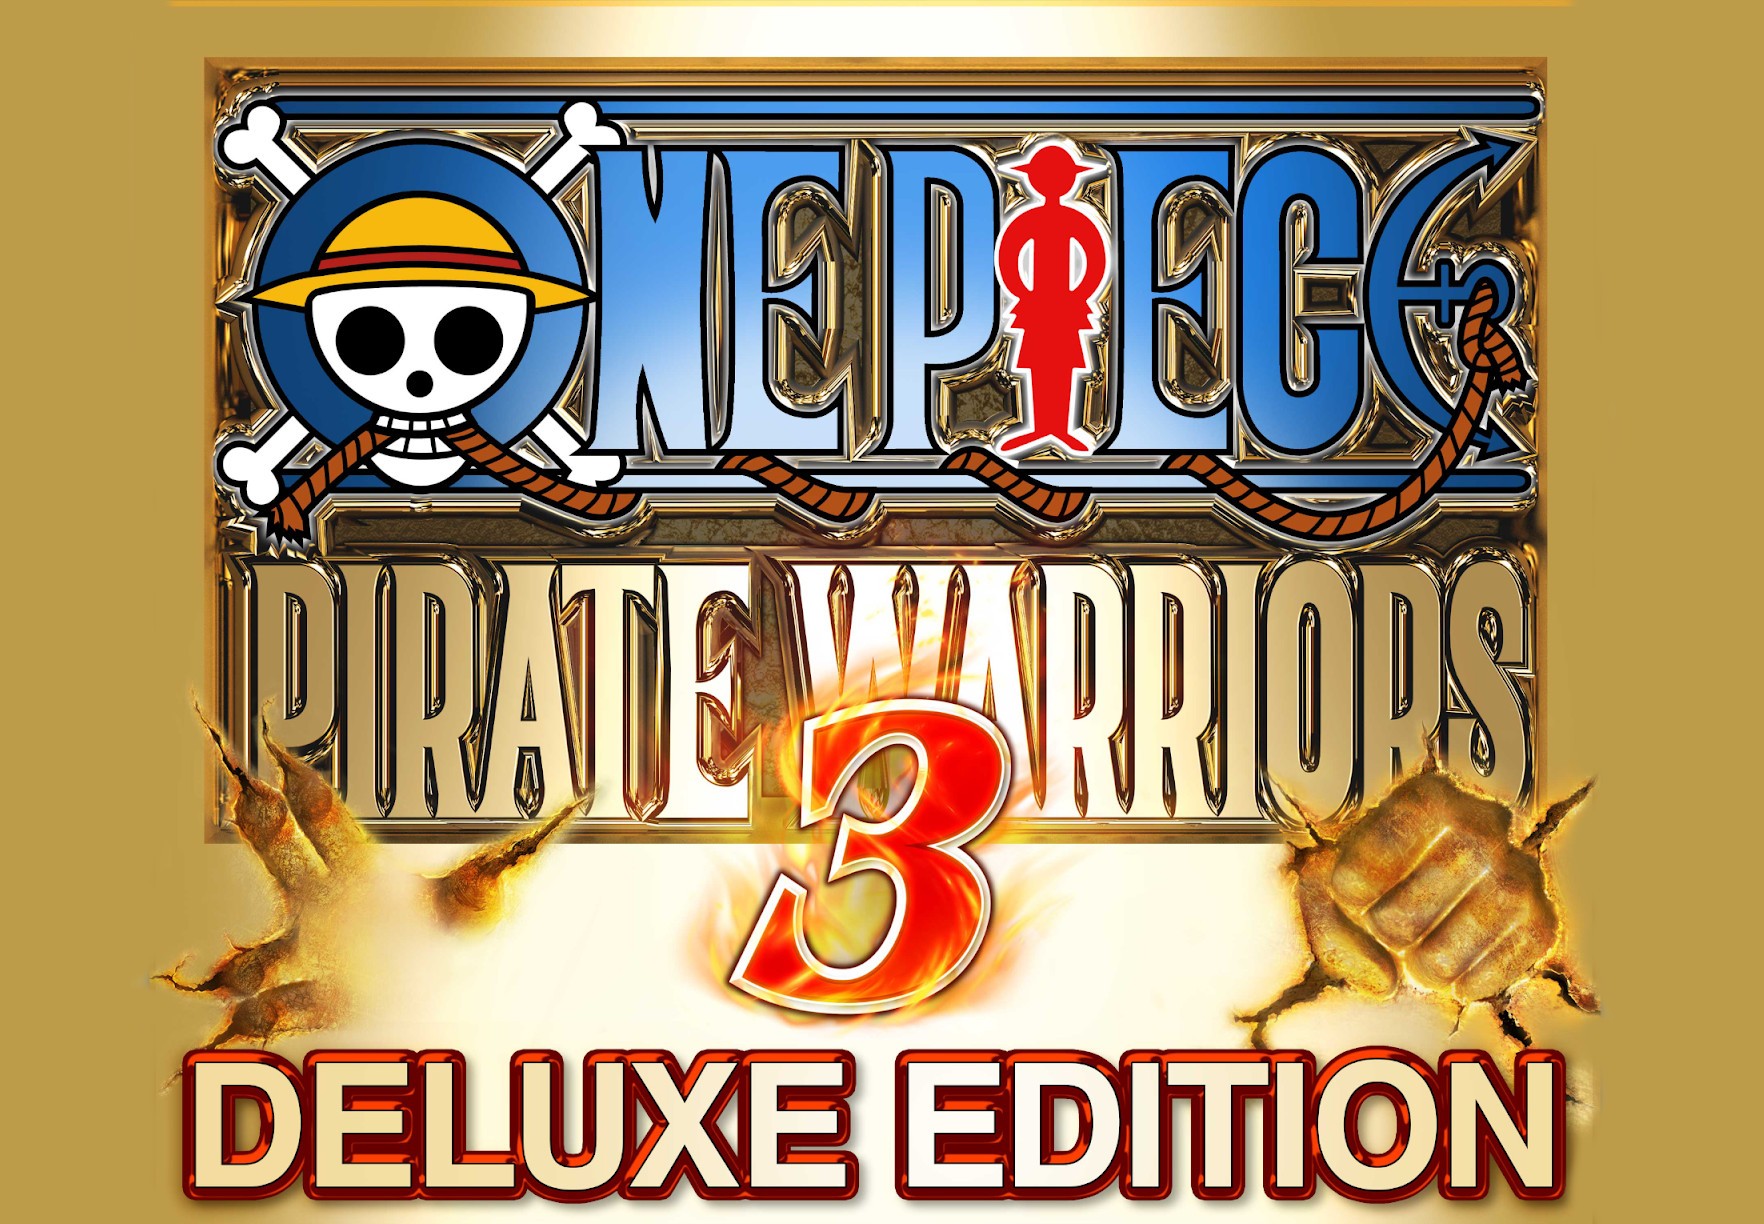 One Piece Pirate Warriors 3 Deluxe Edition EU Nintendo Switch CD Key